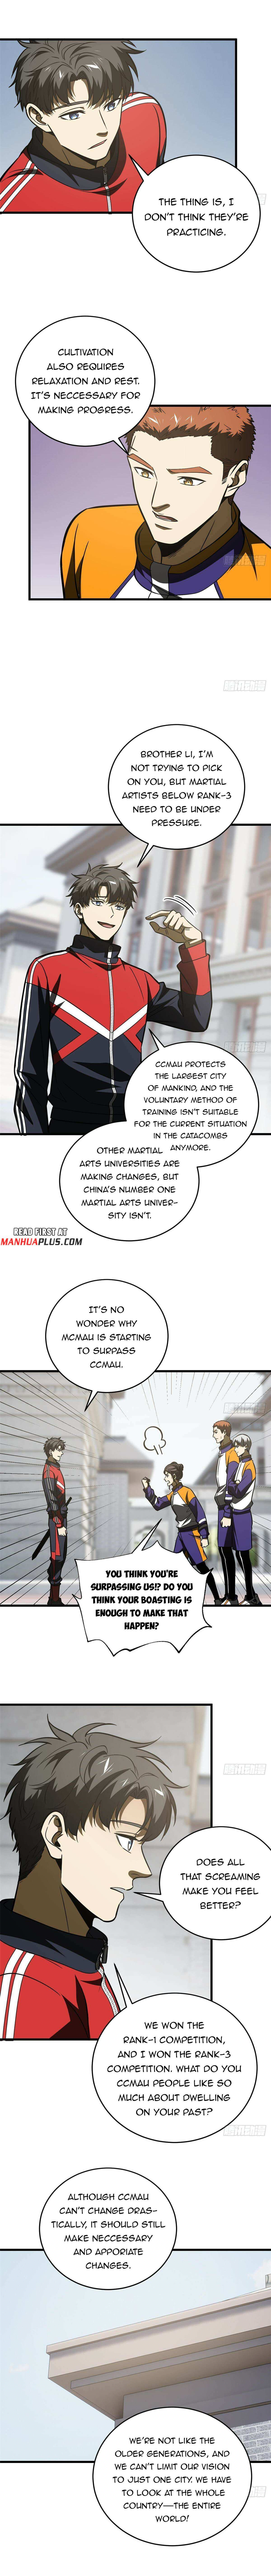 Global Martial Arts - Page 3